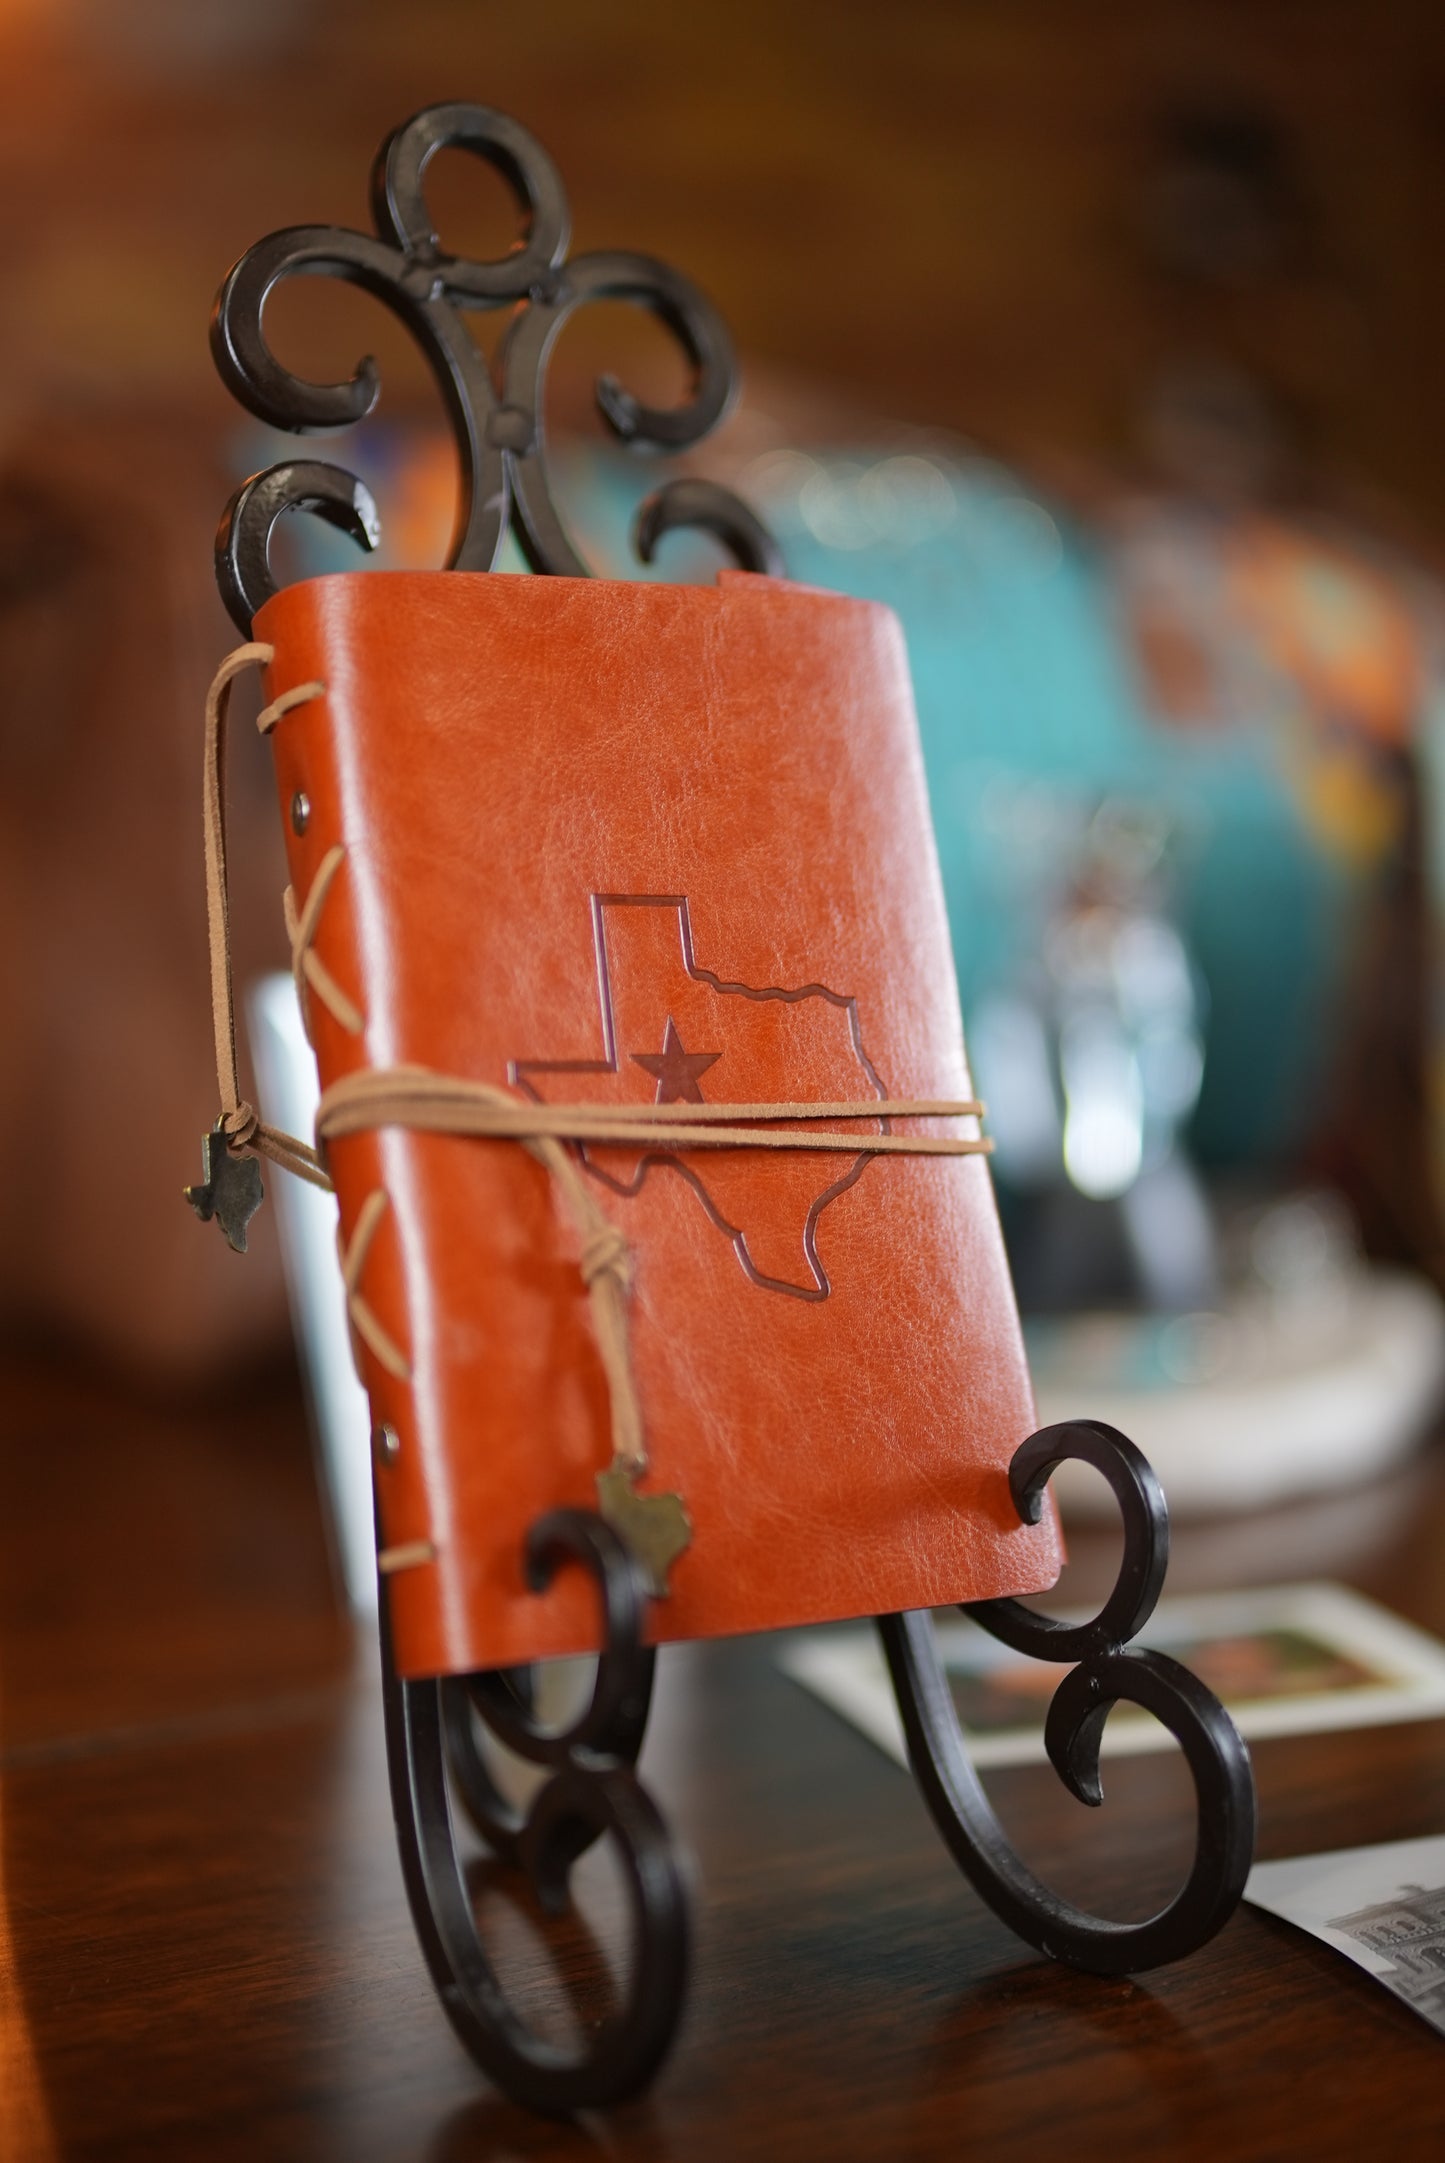 Texas Leather Journal